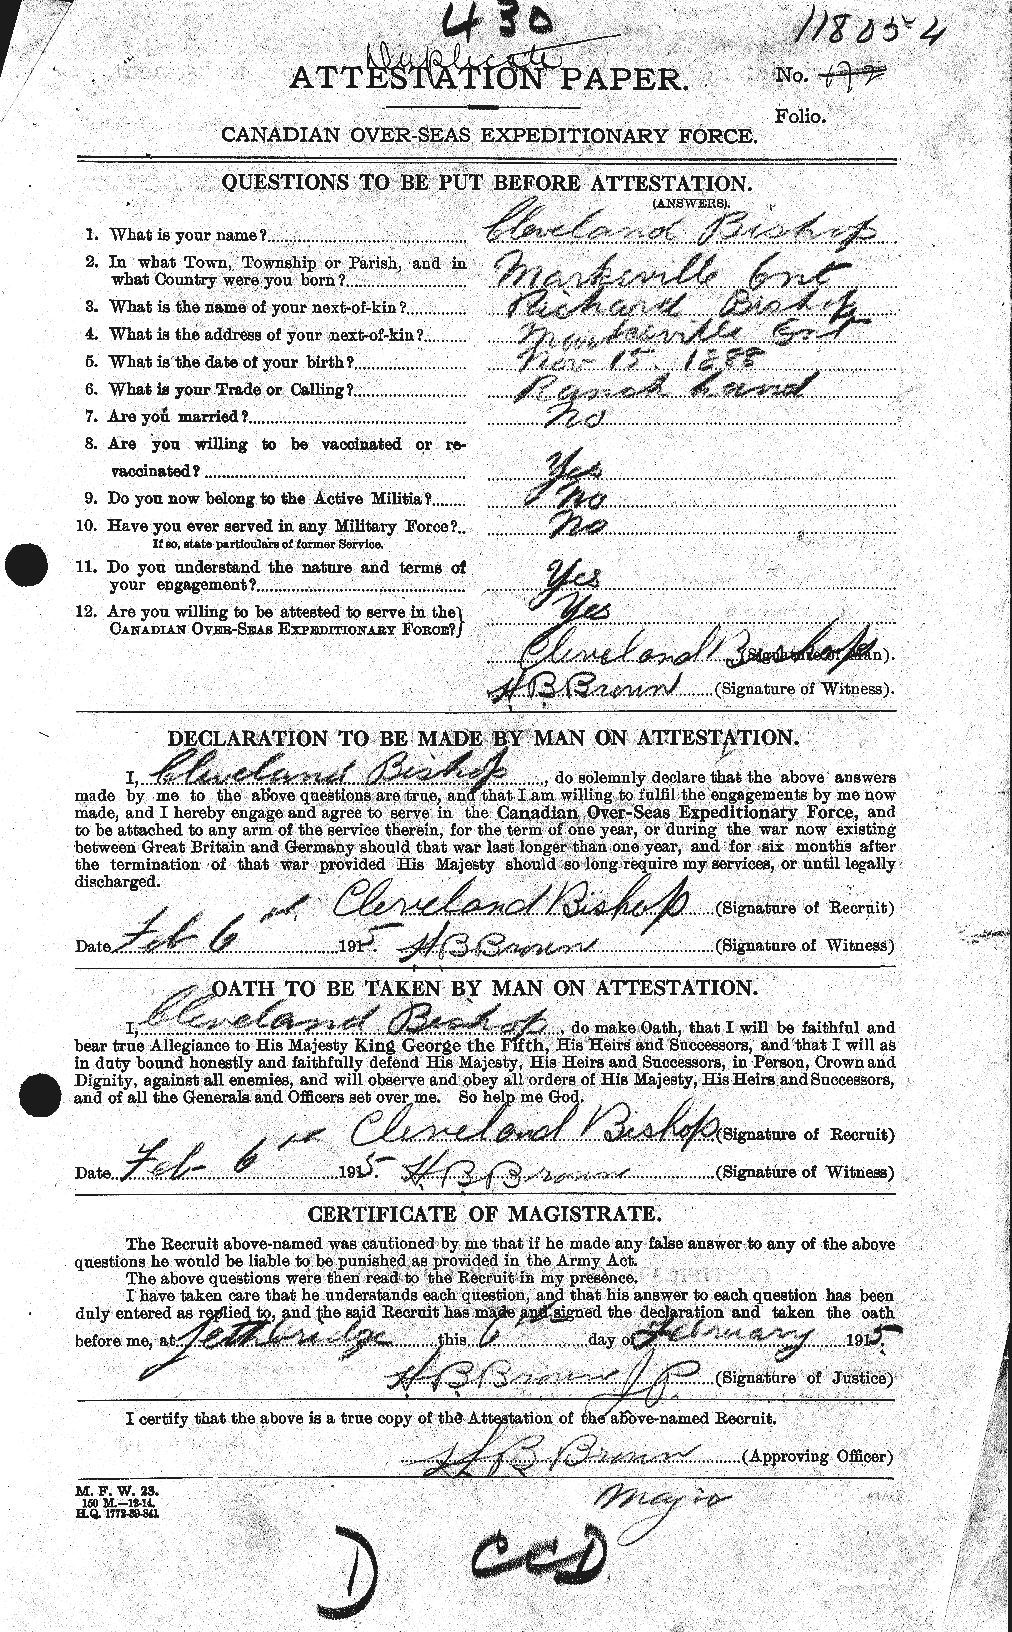 Personnel Records of the First World War - CEF 244205a